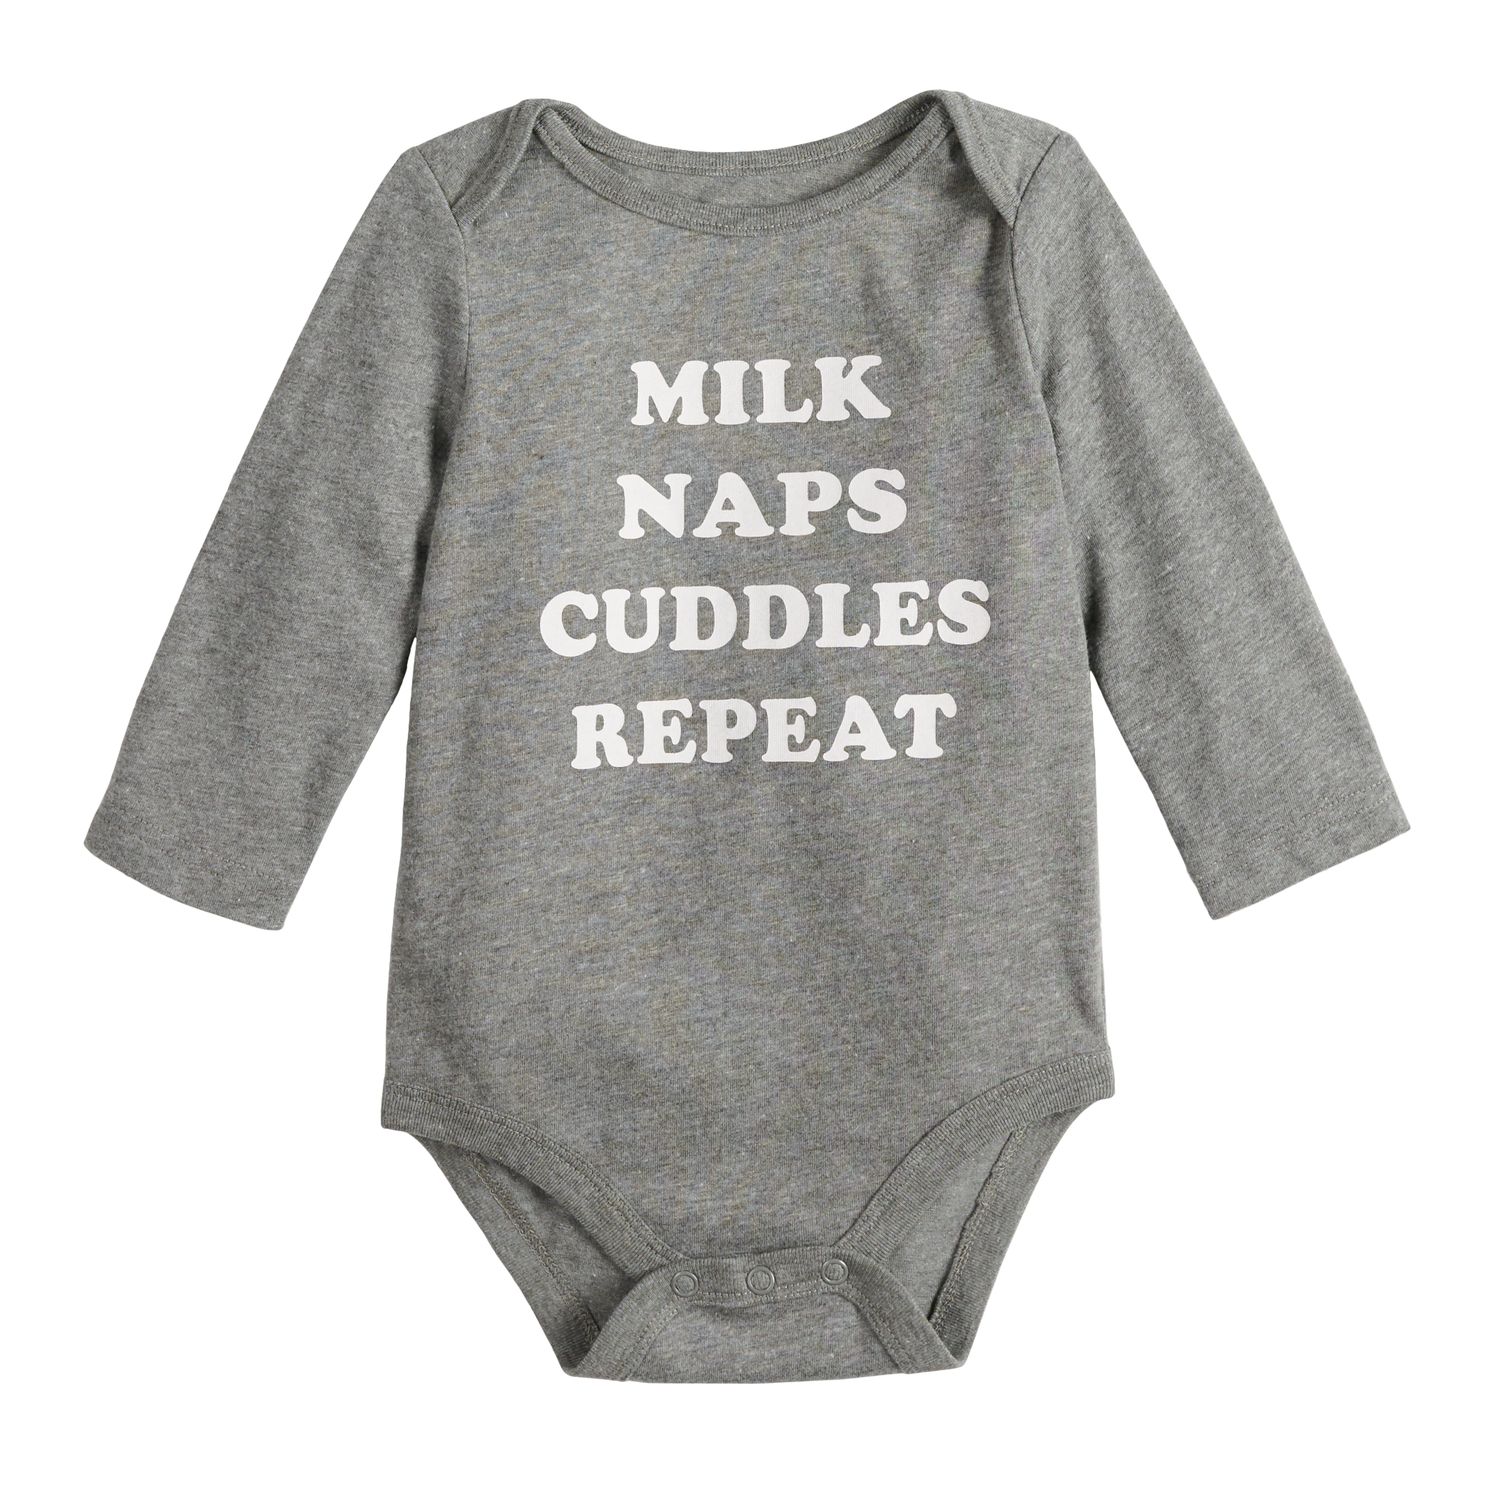 next neutral baby grows